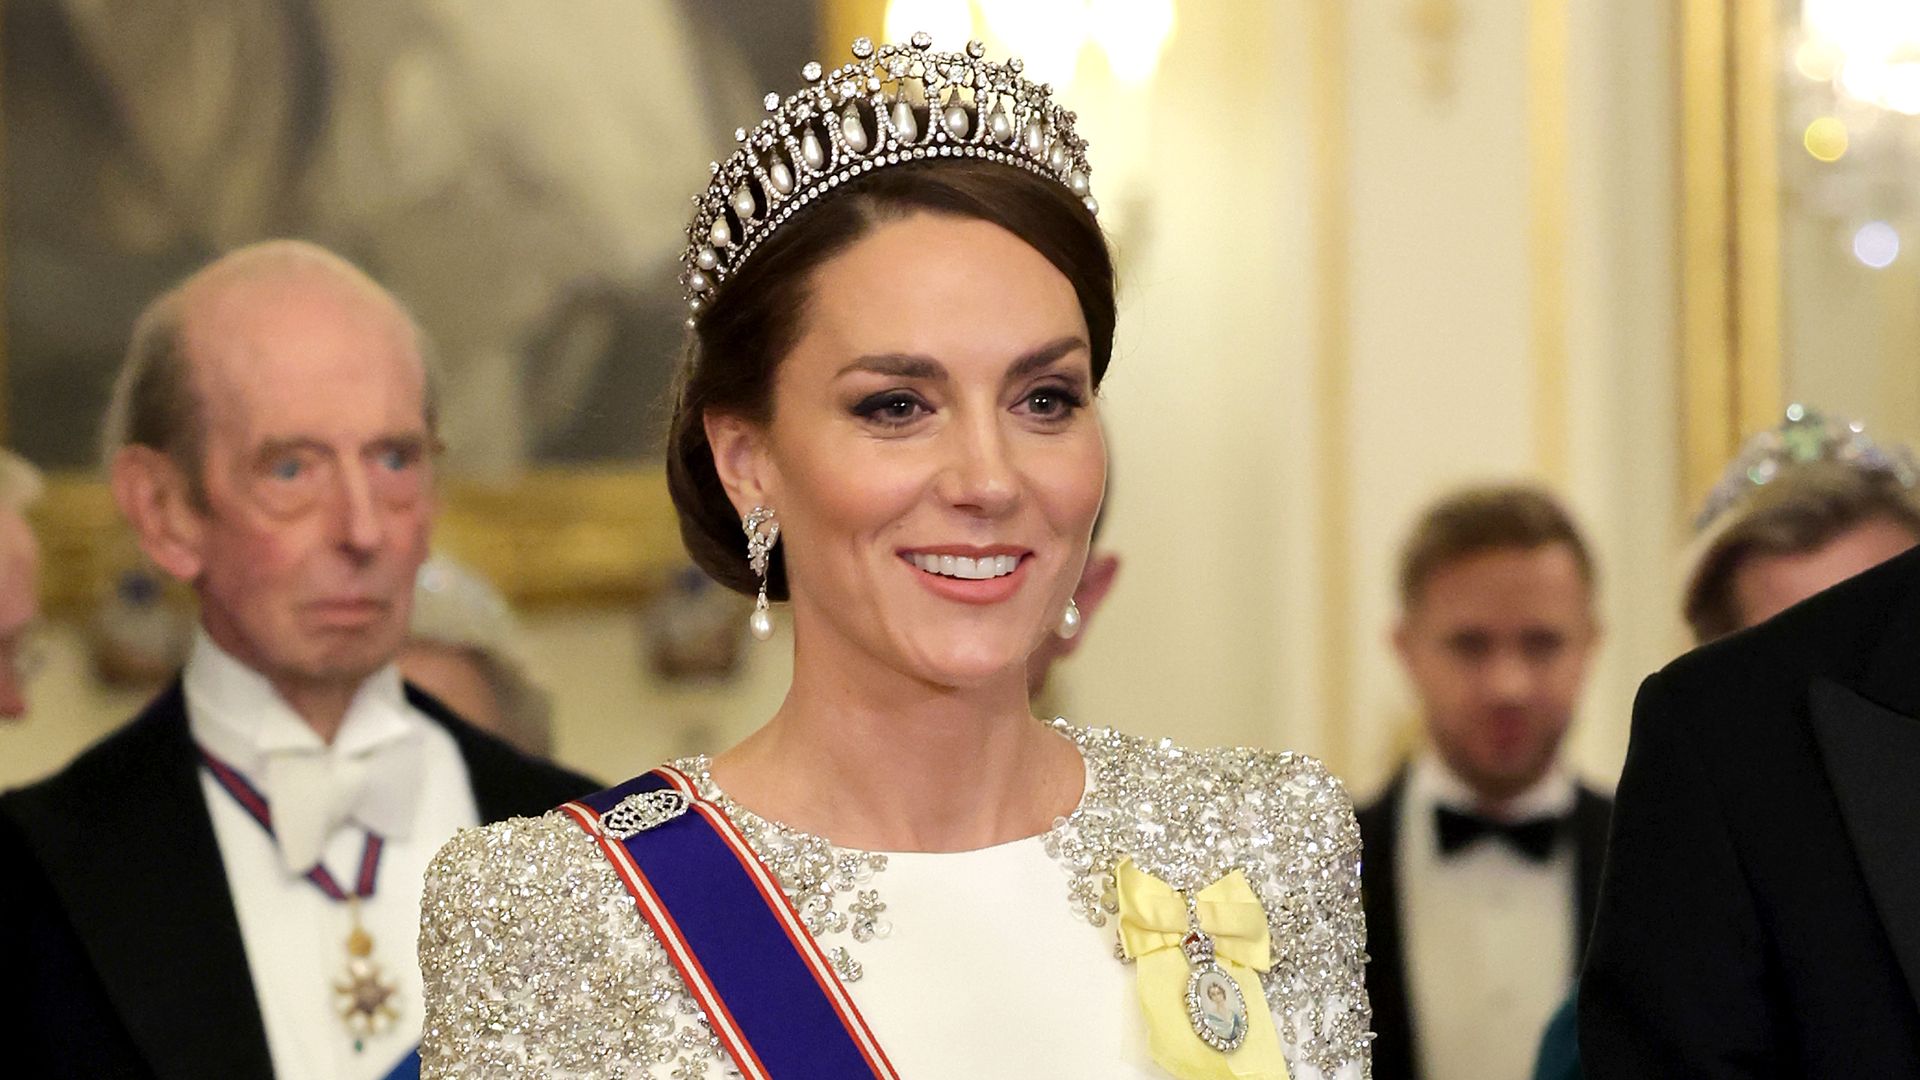 LONDON, ENGLAND - NOVEMBER 22: Catherine, Princess of Wales during the State Banquet at Buckingham Palace on November 22, 2022 in London, England. This is the first state visit hosted by the UK with King Charles III as monarch, and the first state visit h